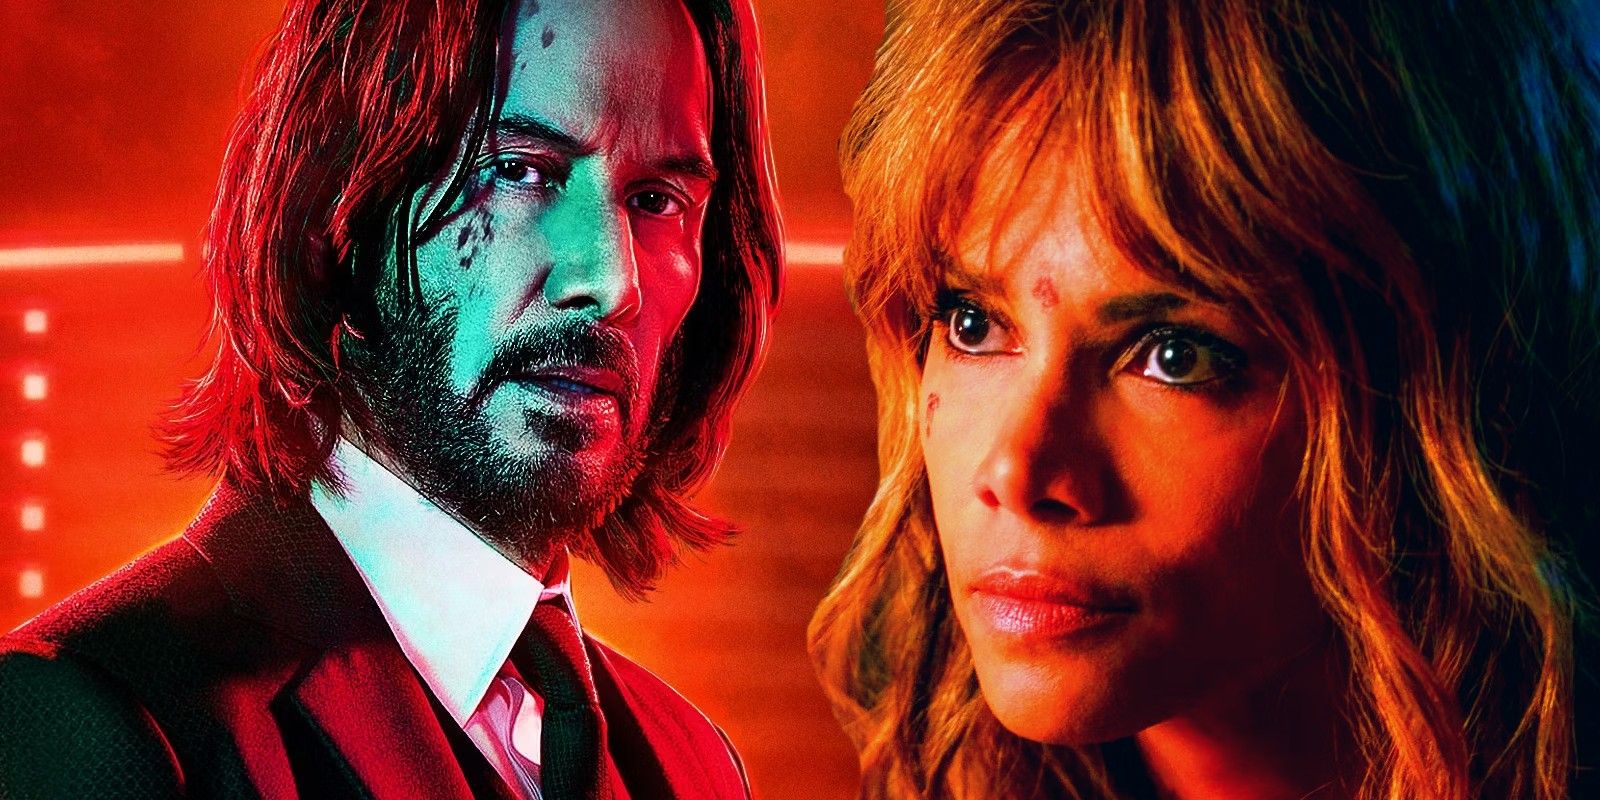 Keanu Reeves as John Wick and Halle Berry as Sofia the in John Wick franchise